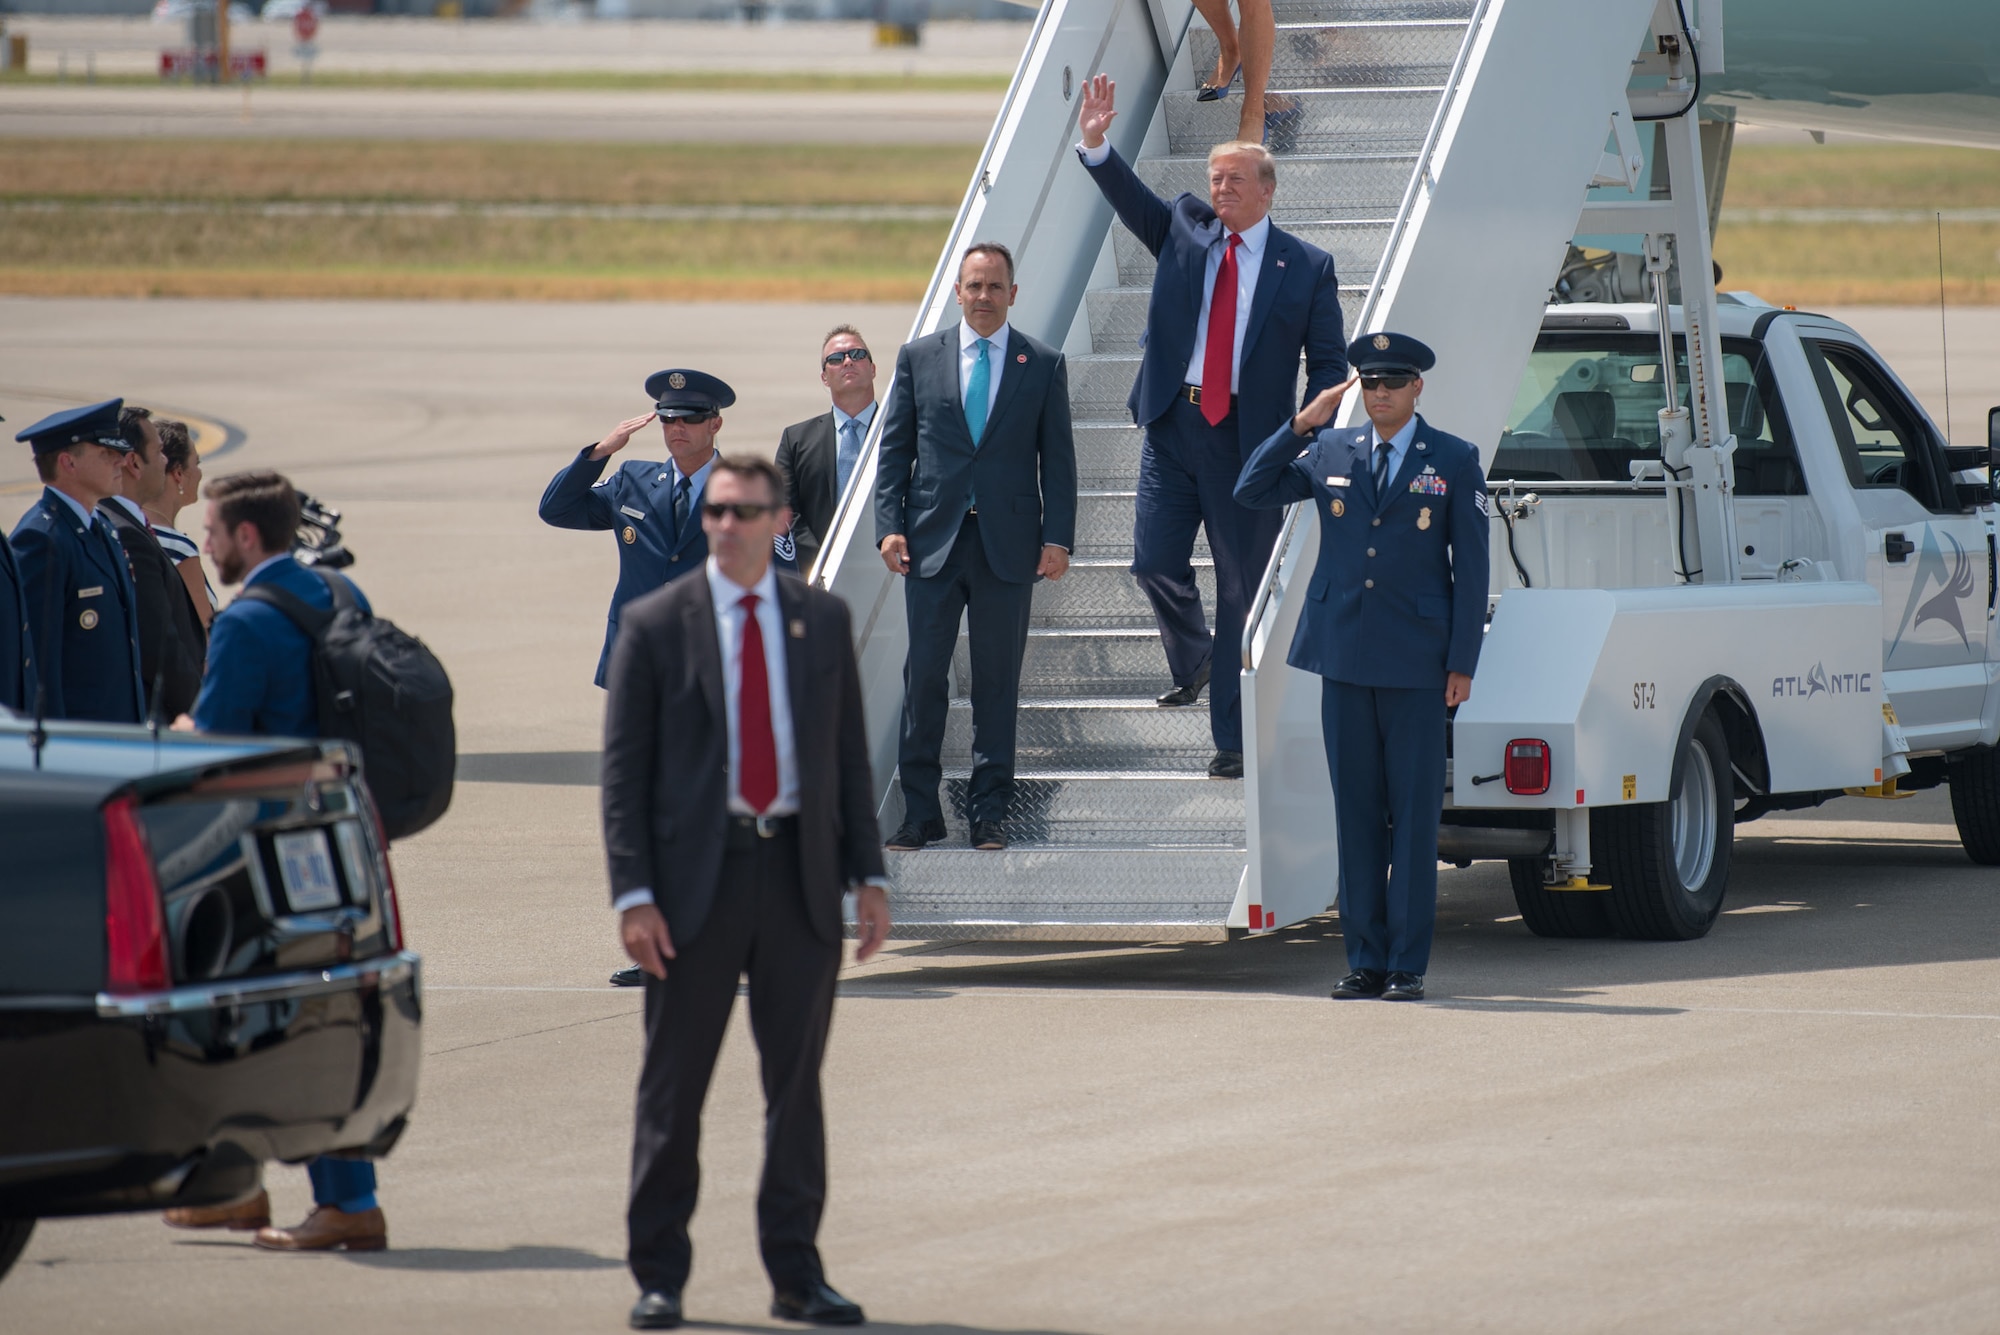 President Donald Trump and Kentucky Gov. Matt Bevin greet supporters as they arrive at the Kentucky Air National Guard Base in Louisville, Ky., Aug. 21, 2019. Trump was in town to speak at an AMVETS convention and attend a fundraiser for Bevin’s re-election campaign. (U.S. Air National Guard photo by Phil Speck)